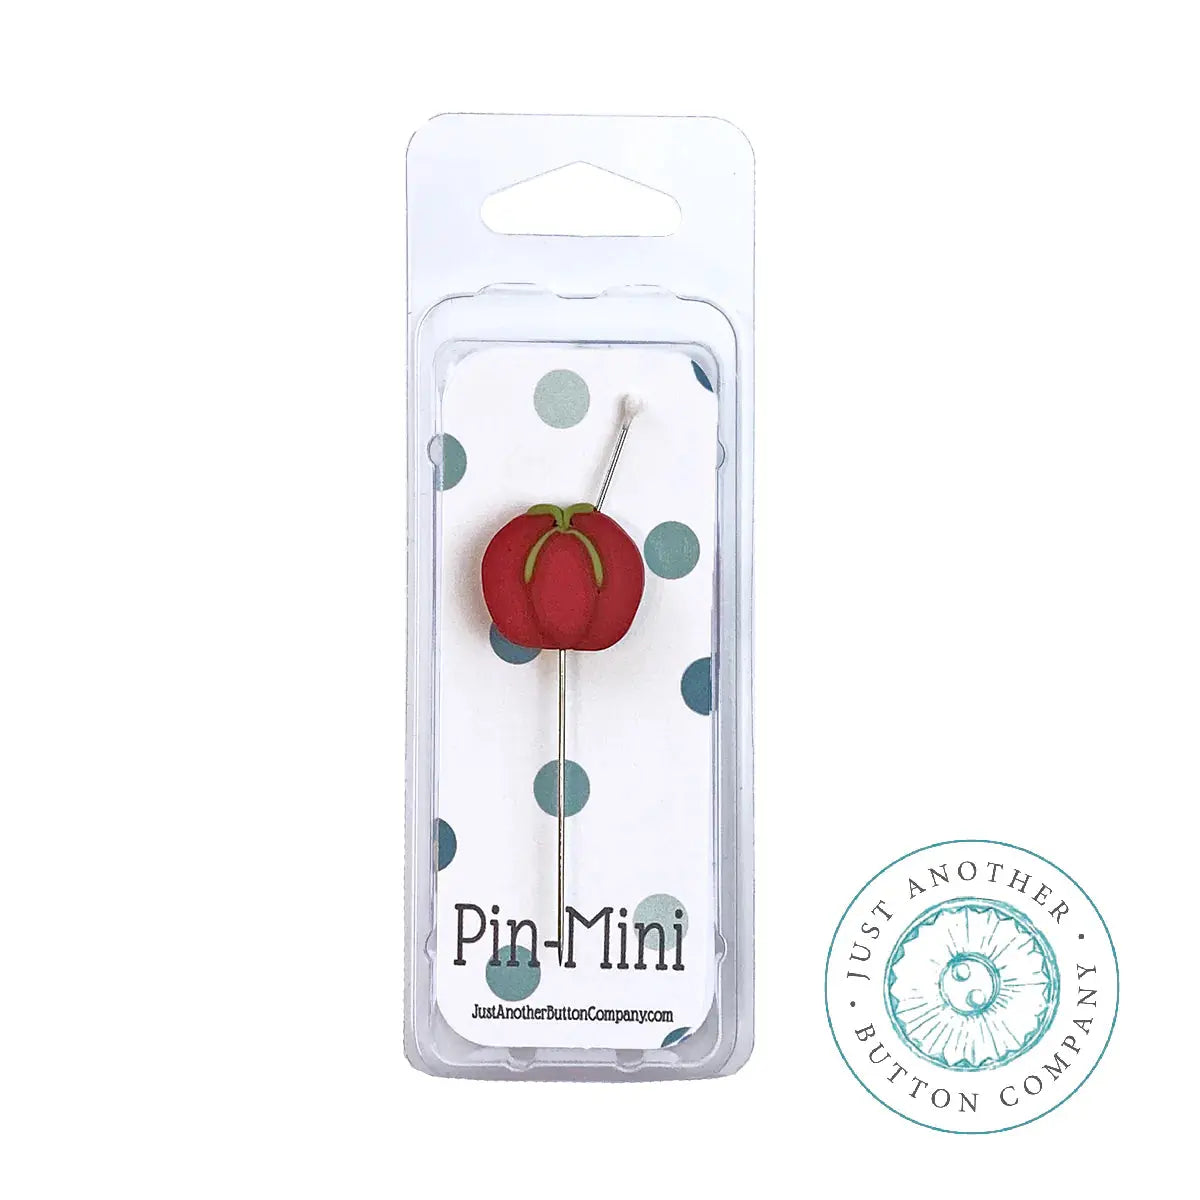 Solo Tomato (529) by Just Another Button Co Just Another Button Co